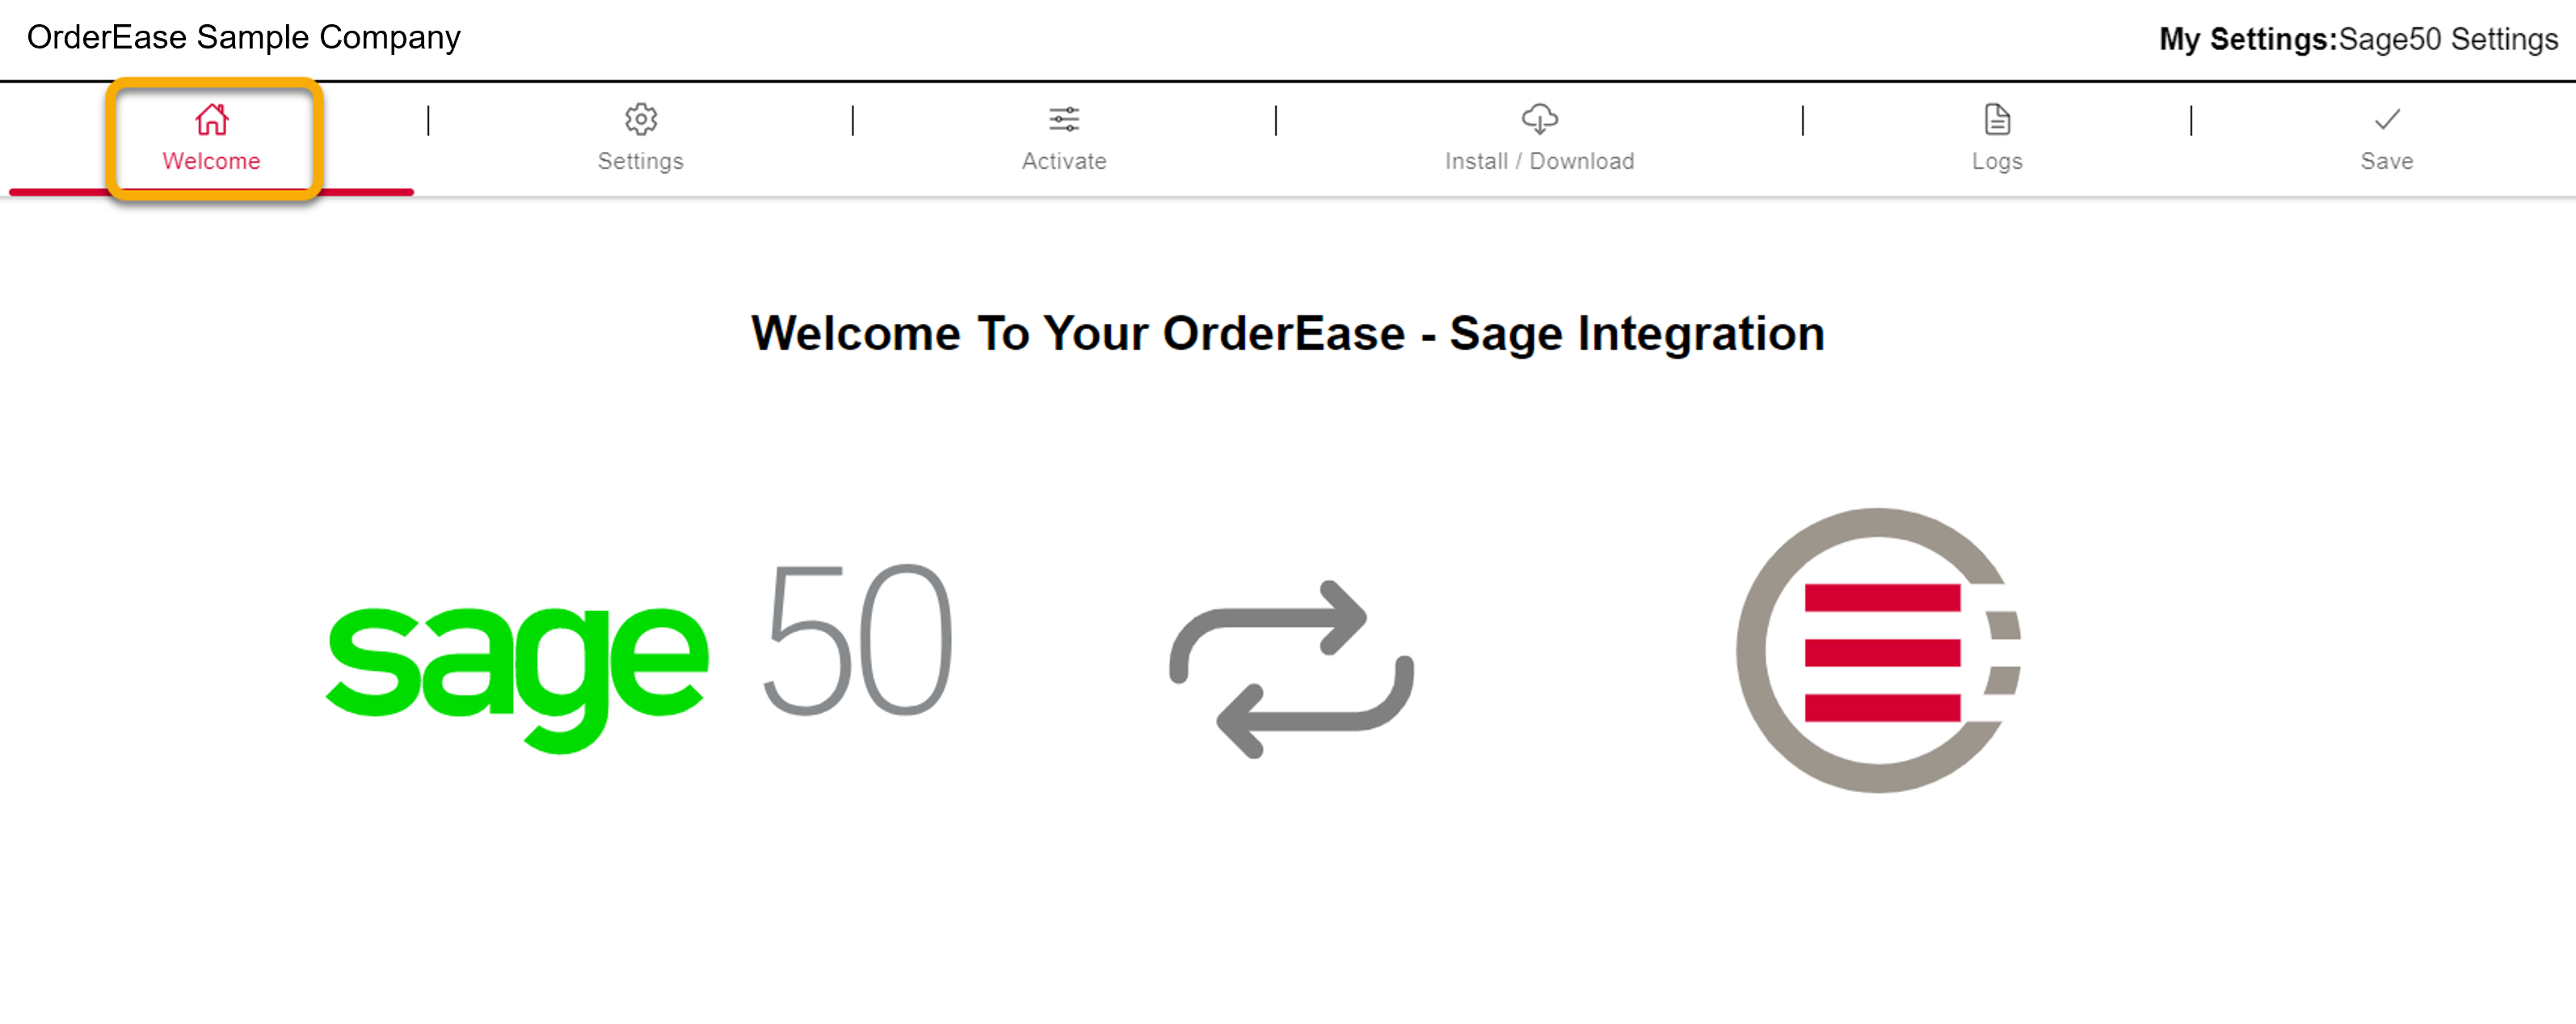 Sage integration welcome page